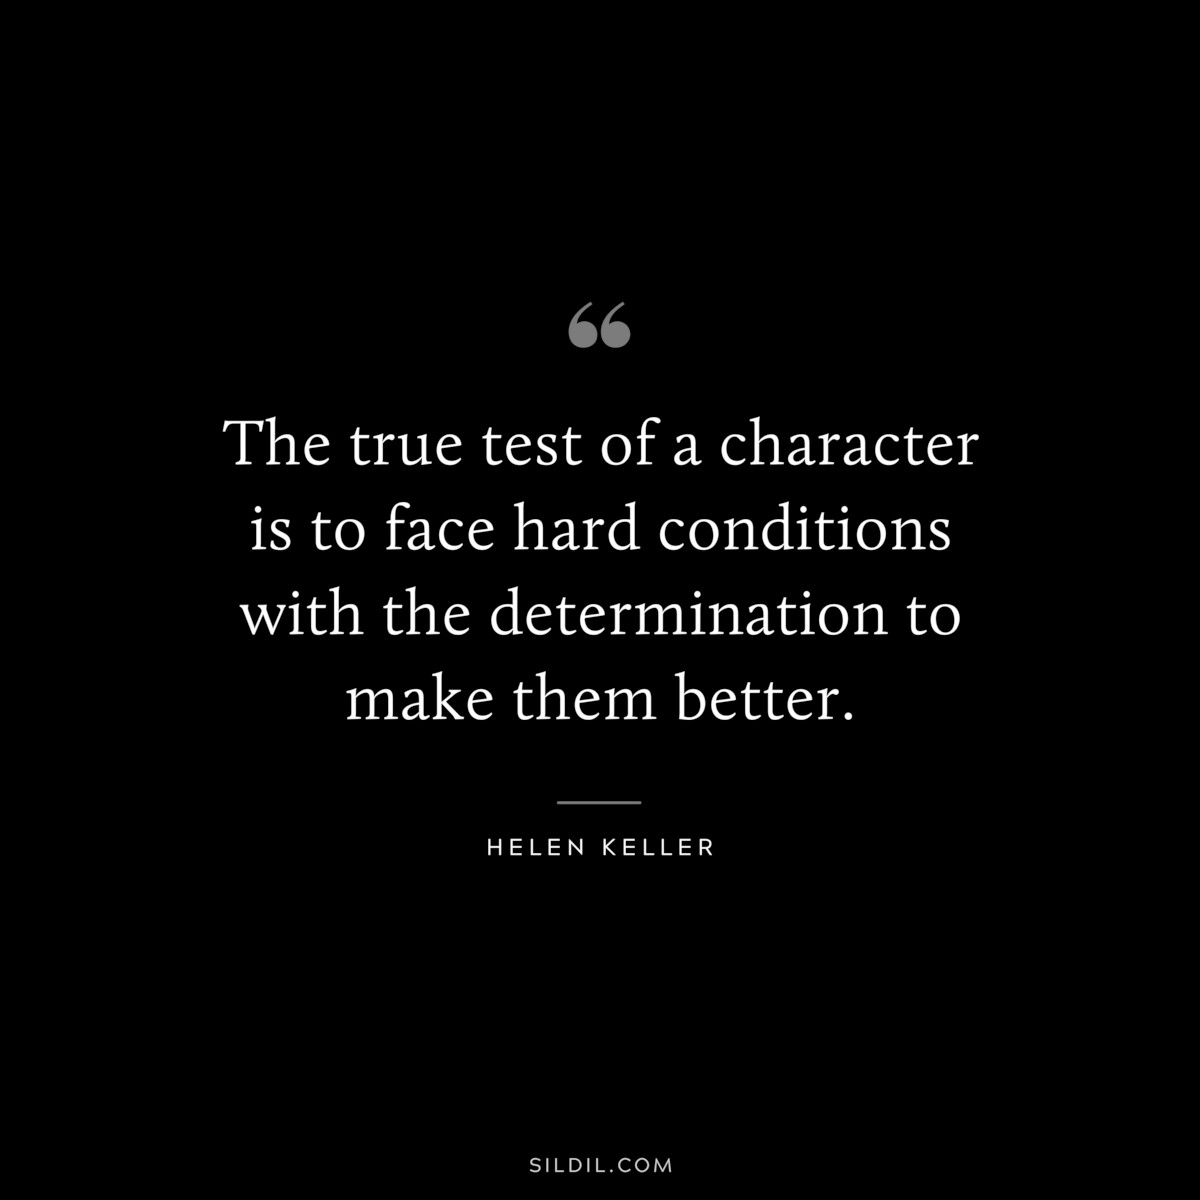 The true test of a character is to face hard conditions with the determination to make them better. ― Helen Keller